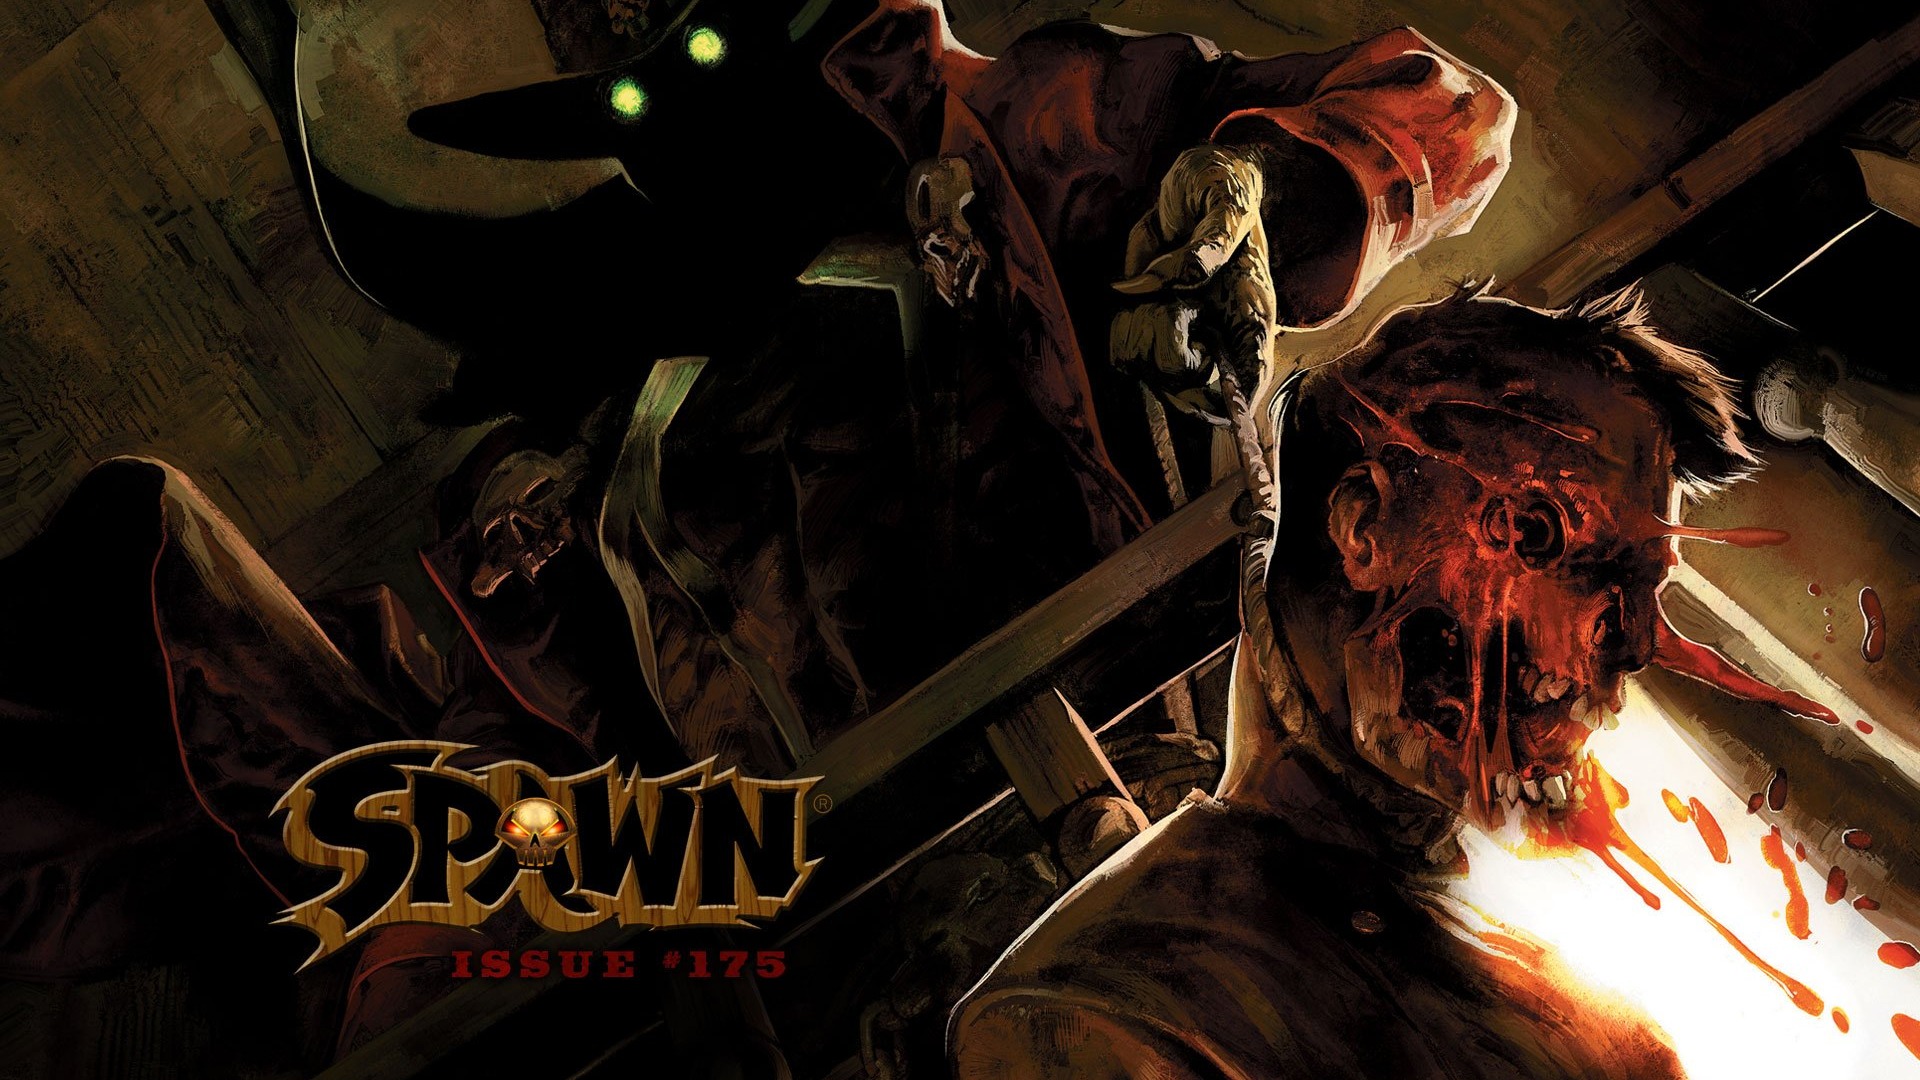 Spawn HD Wallpapers #4 - 1920x1080